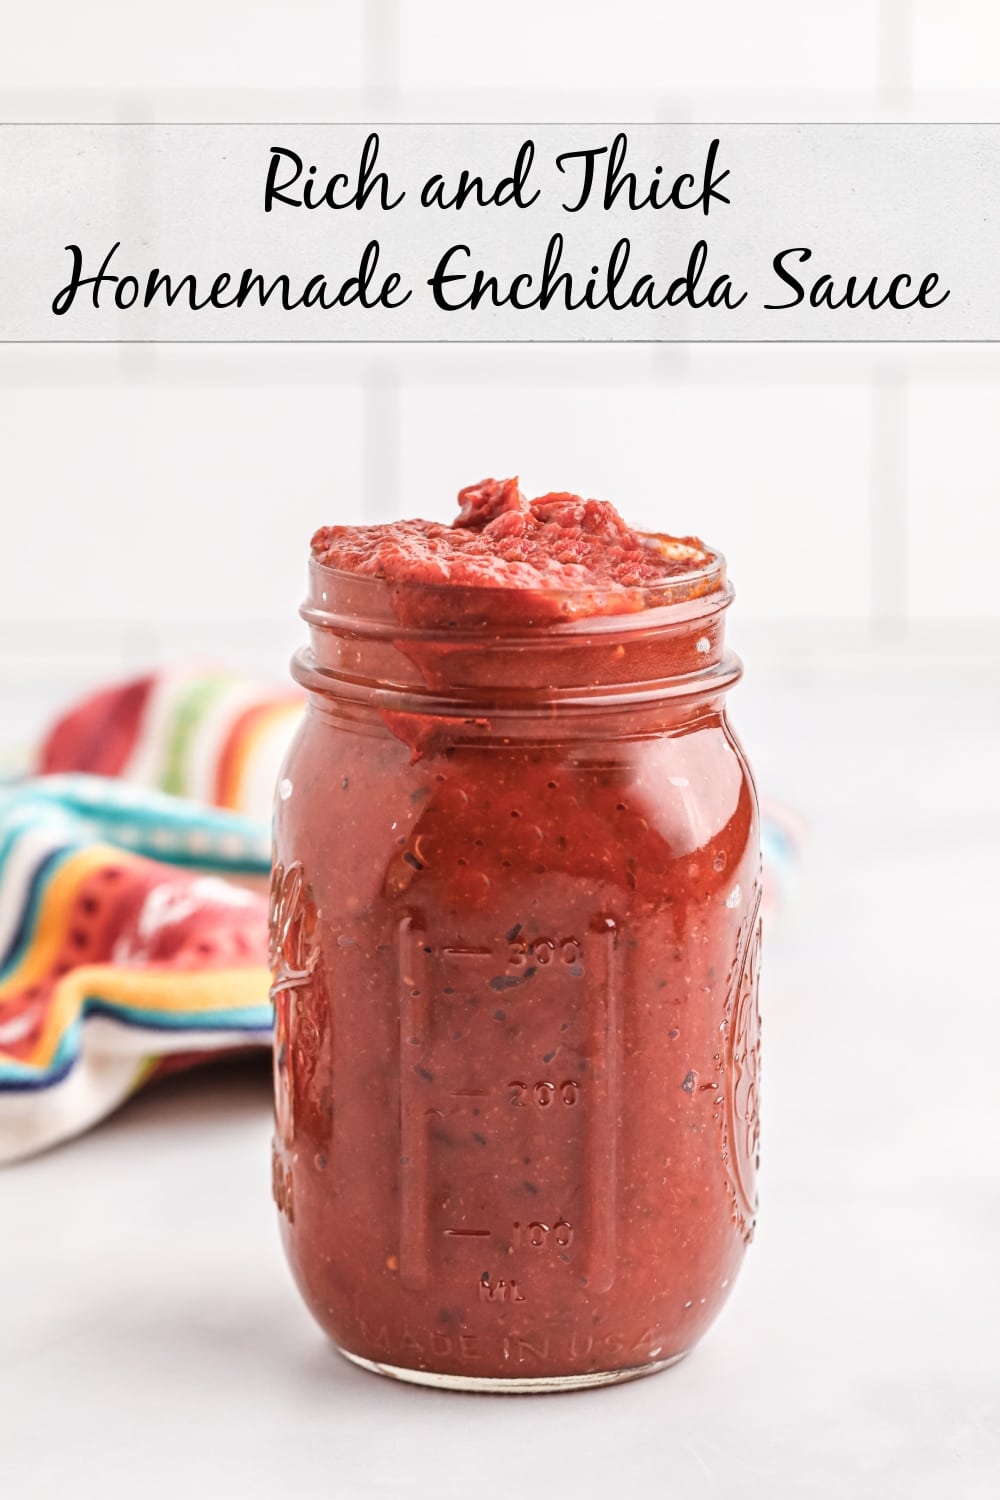 Say no to soupy enchiladas with this rich and thick homemade enchilada sauce. If you're tired of runny enchiladas made with canned sauce, this recipe is for you! via @cmpollak1